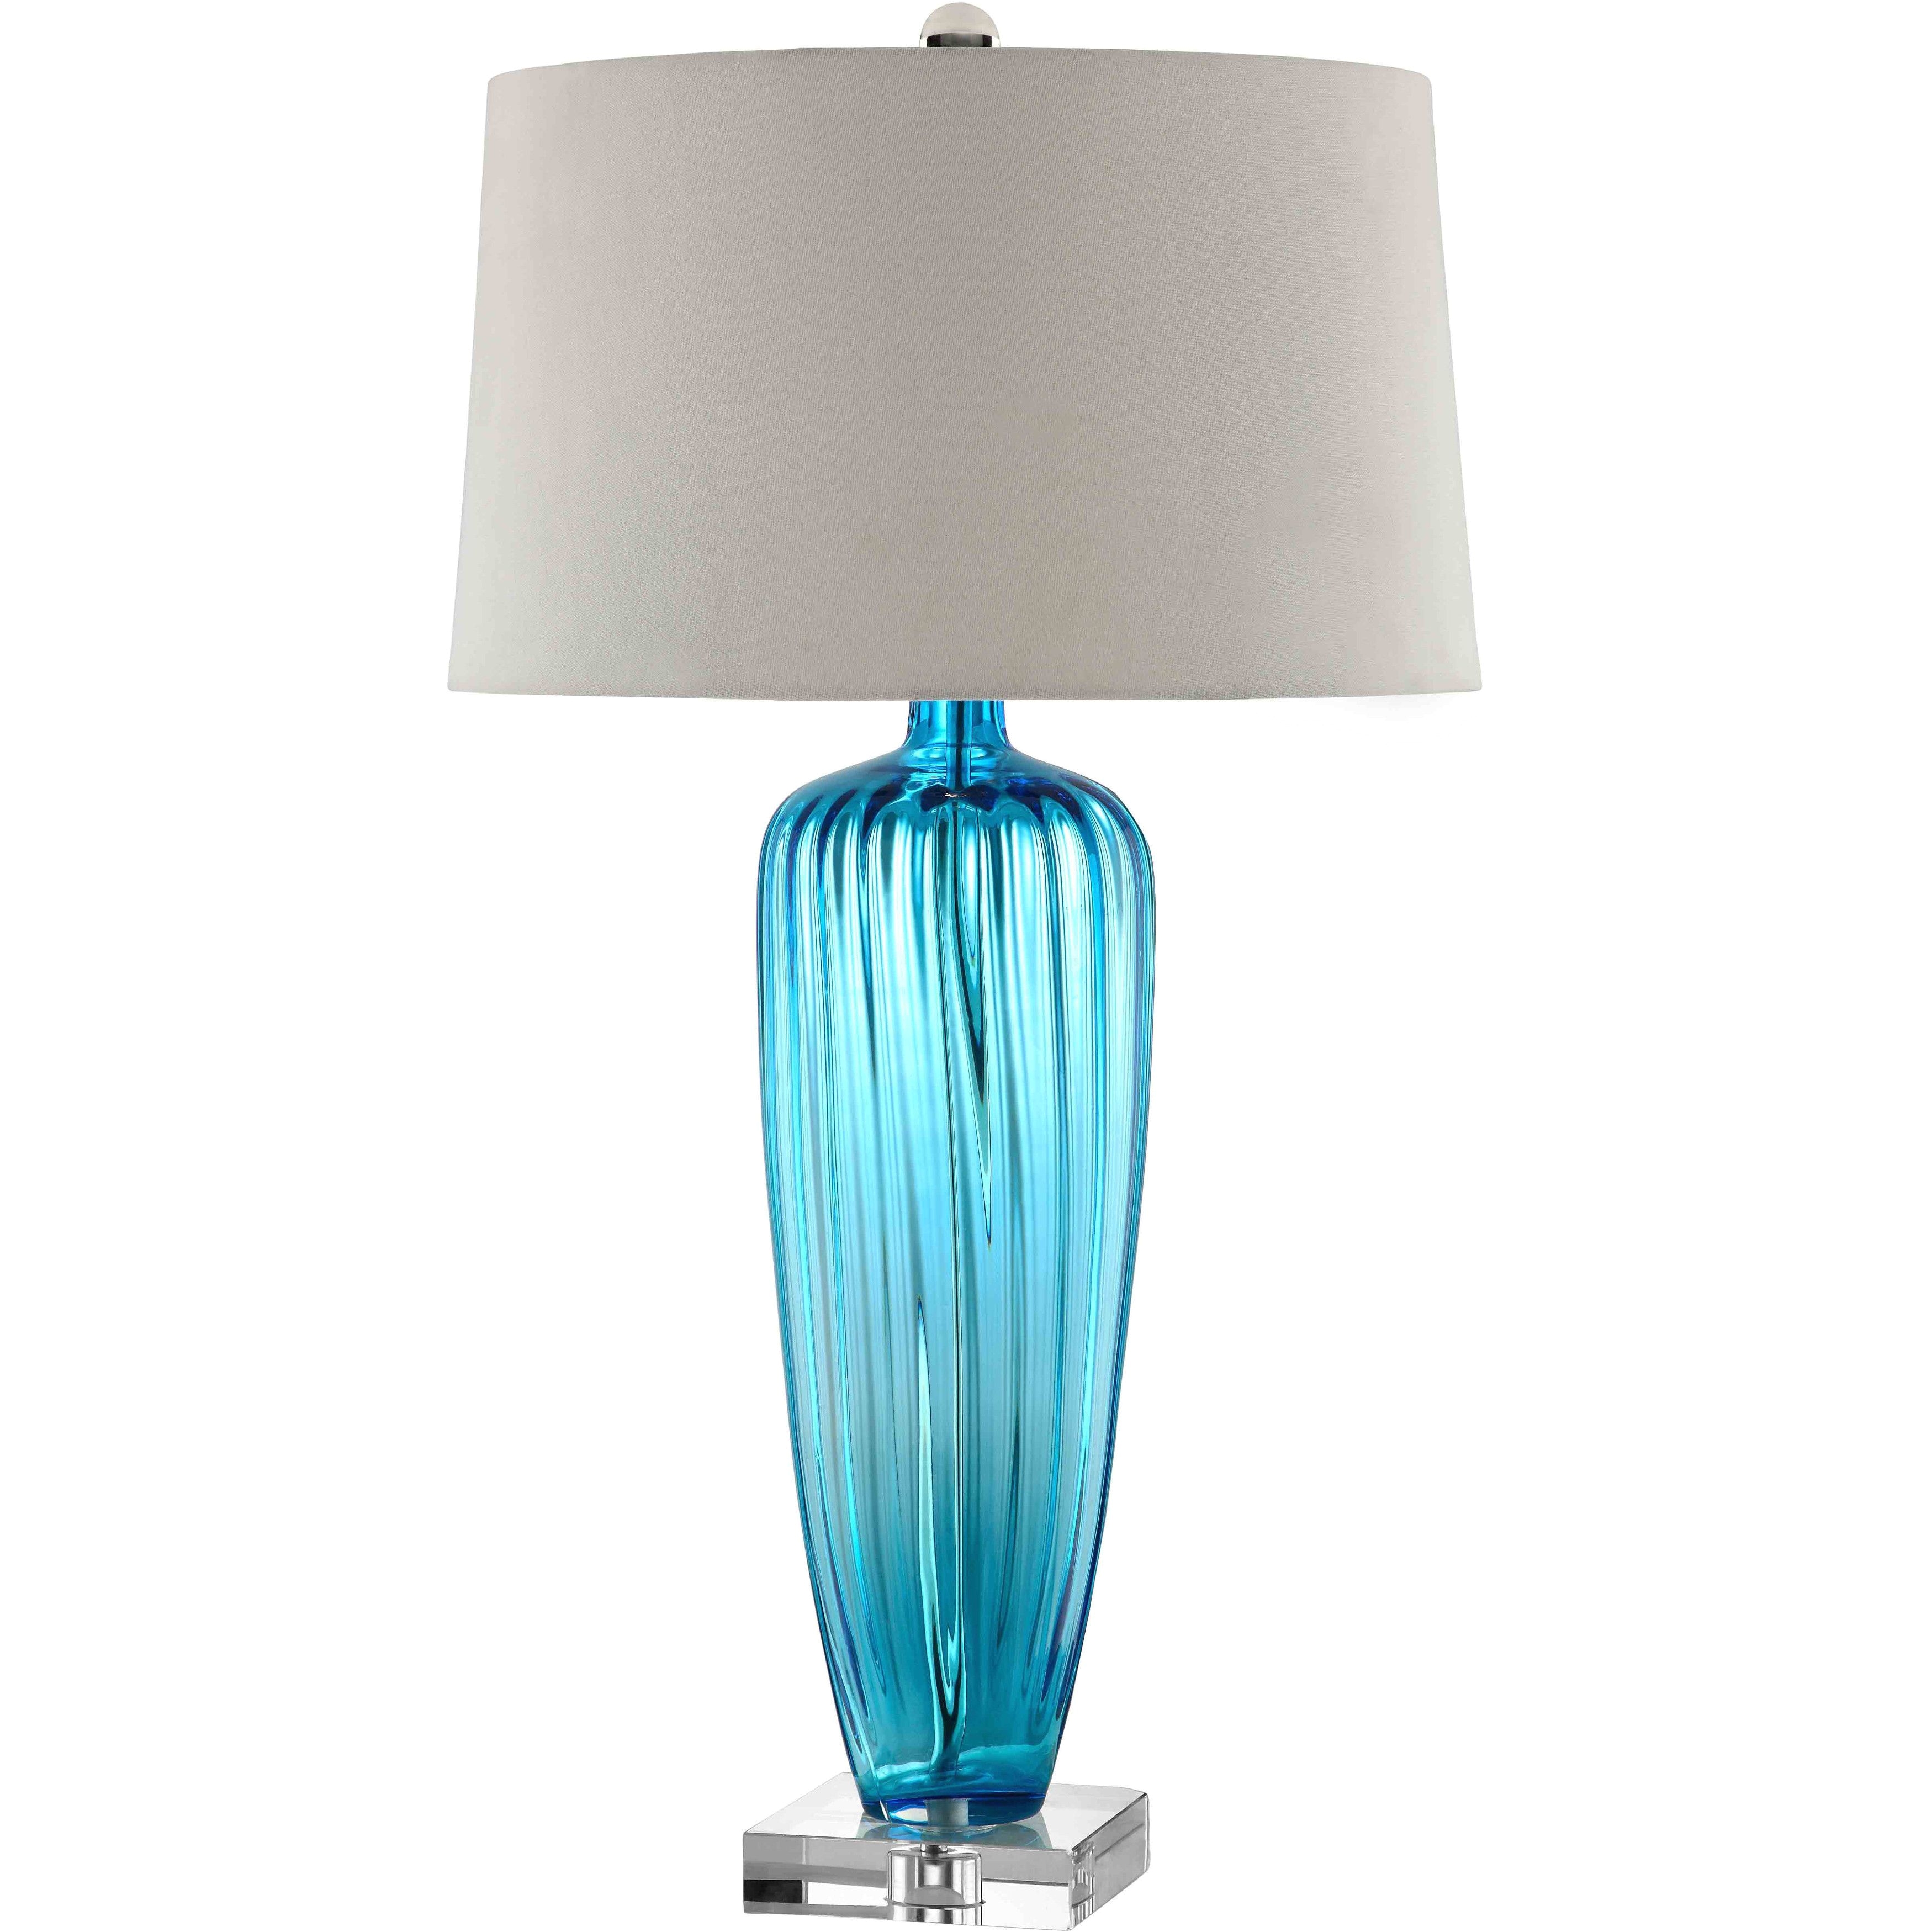 like a tall drink of water this stately glass table lamp is ultimately refreshing